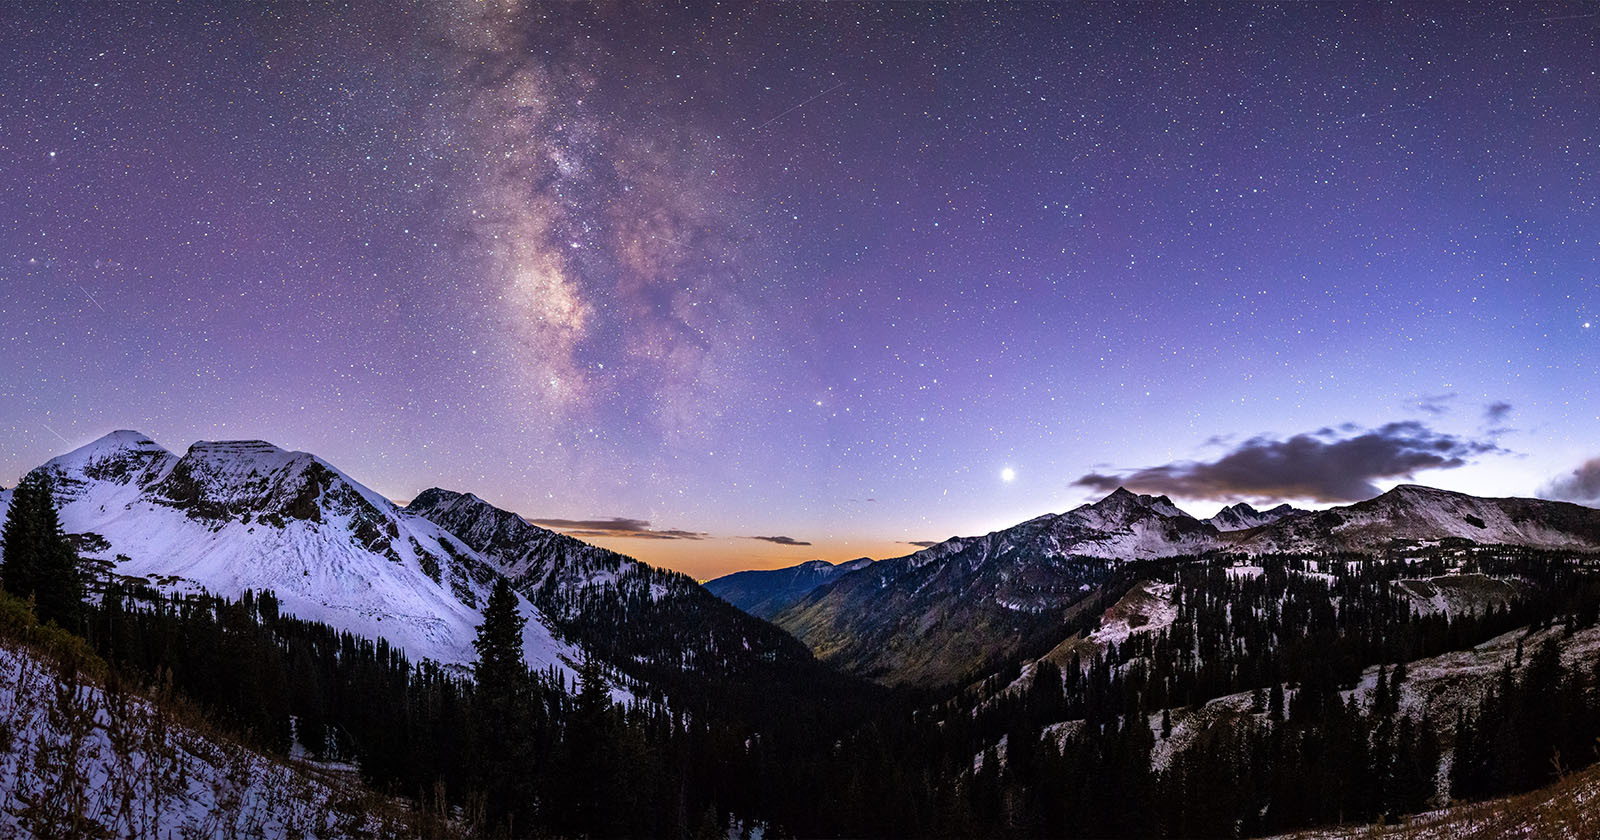 An Astrophotographers Tips for Capturing the Best Night Sky Photos